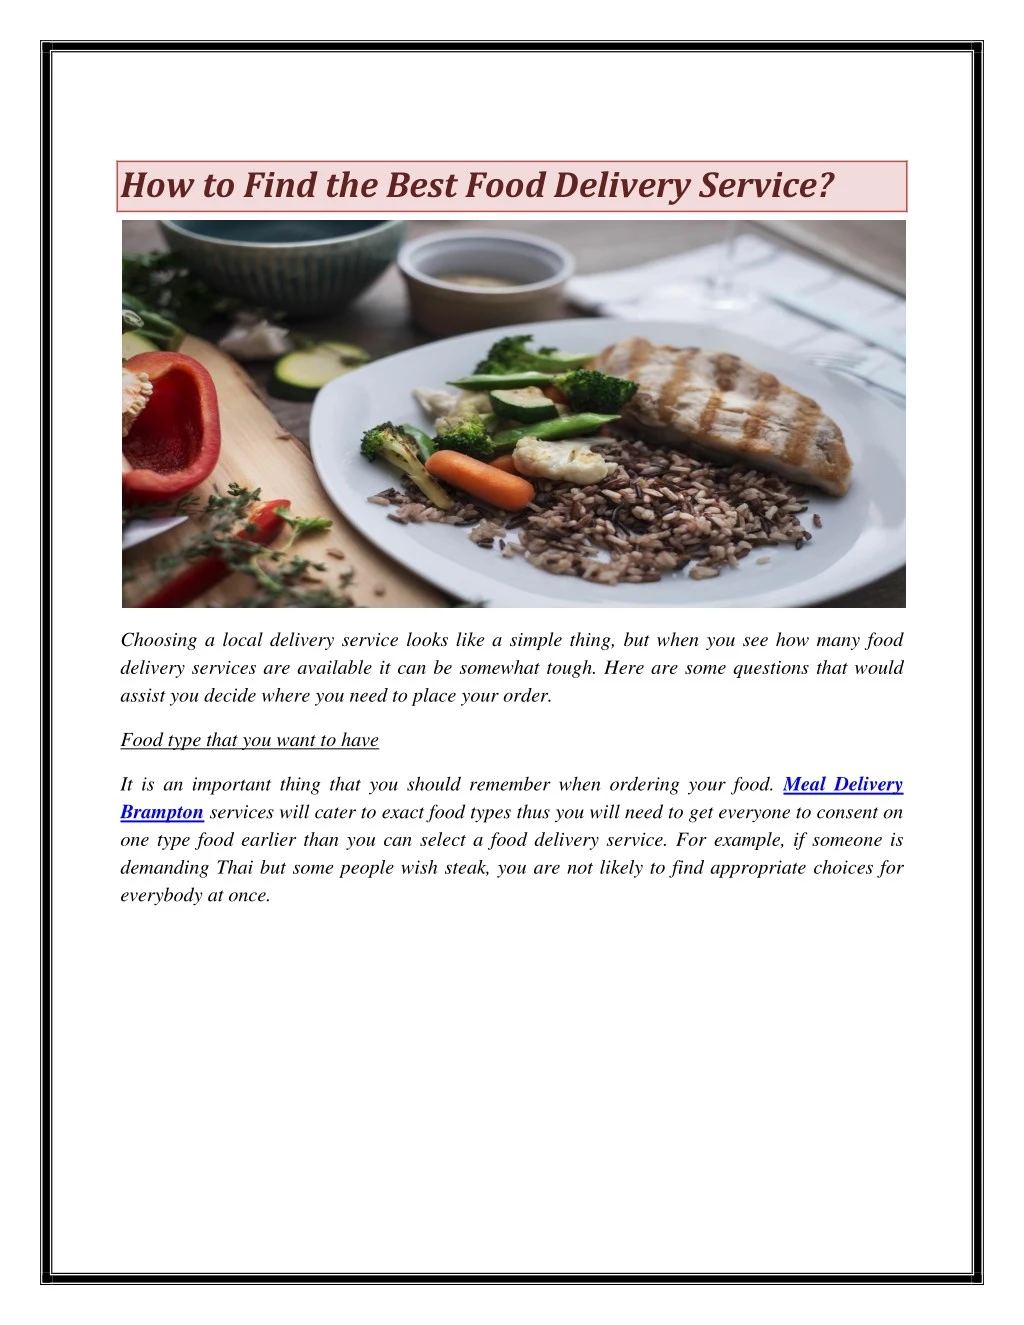 how to find the best food delivery service